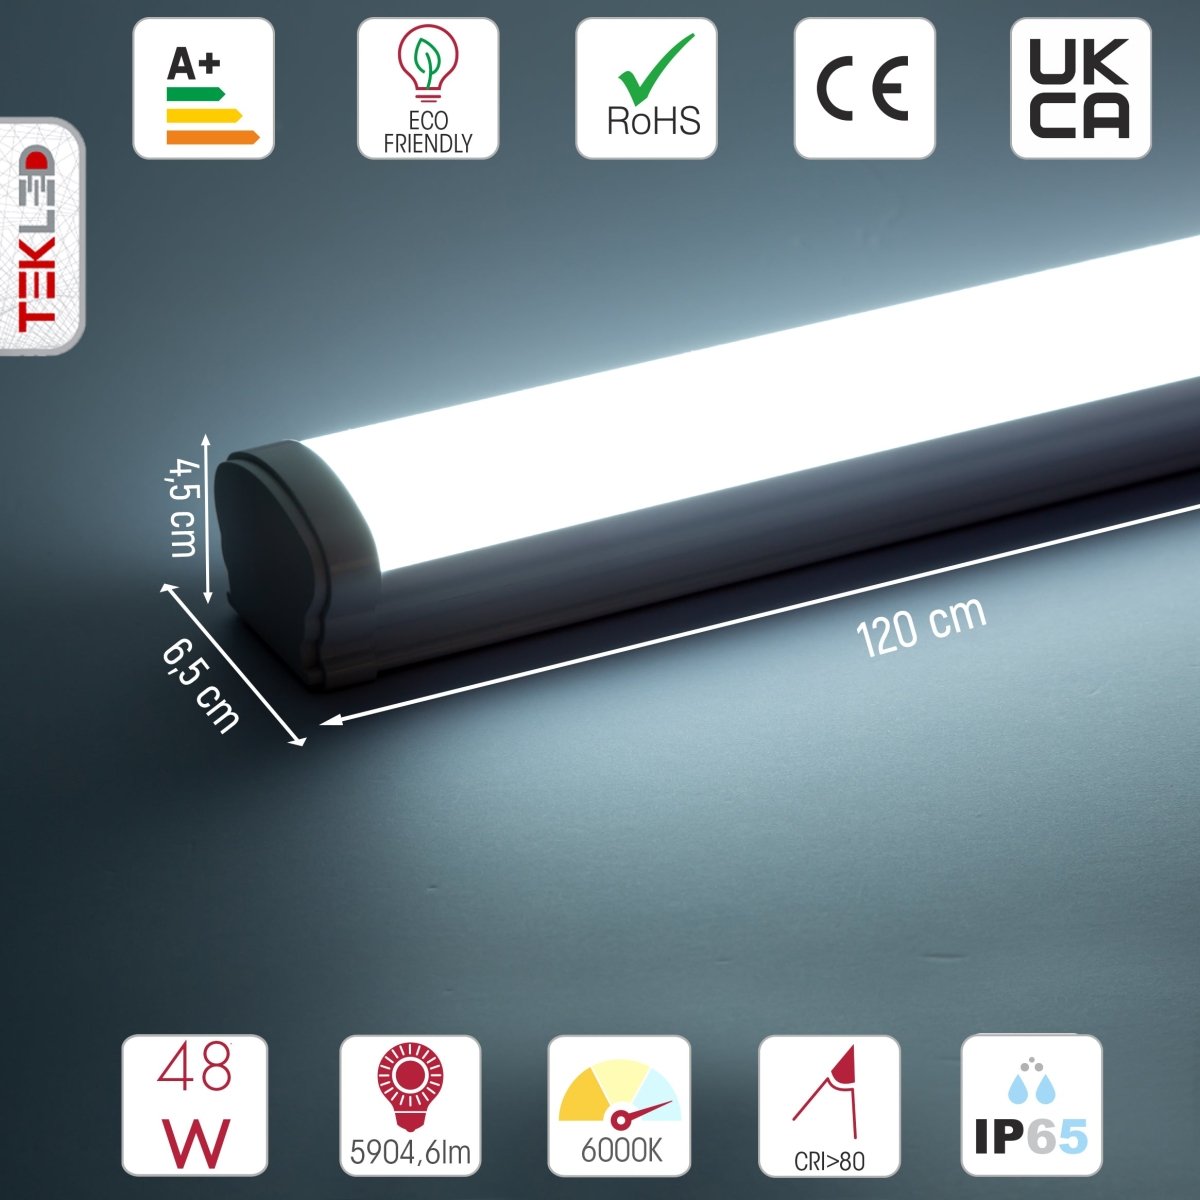 Technical specs and measurements for LED Tri-proof Batten Linear Fitting 48W 6500K Cool Daylight IP65 120cm 4ft